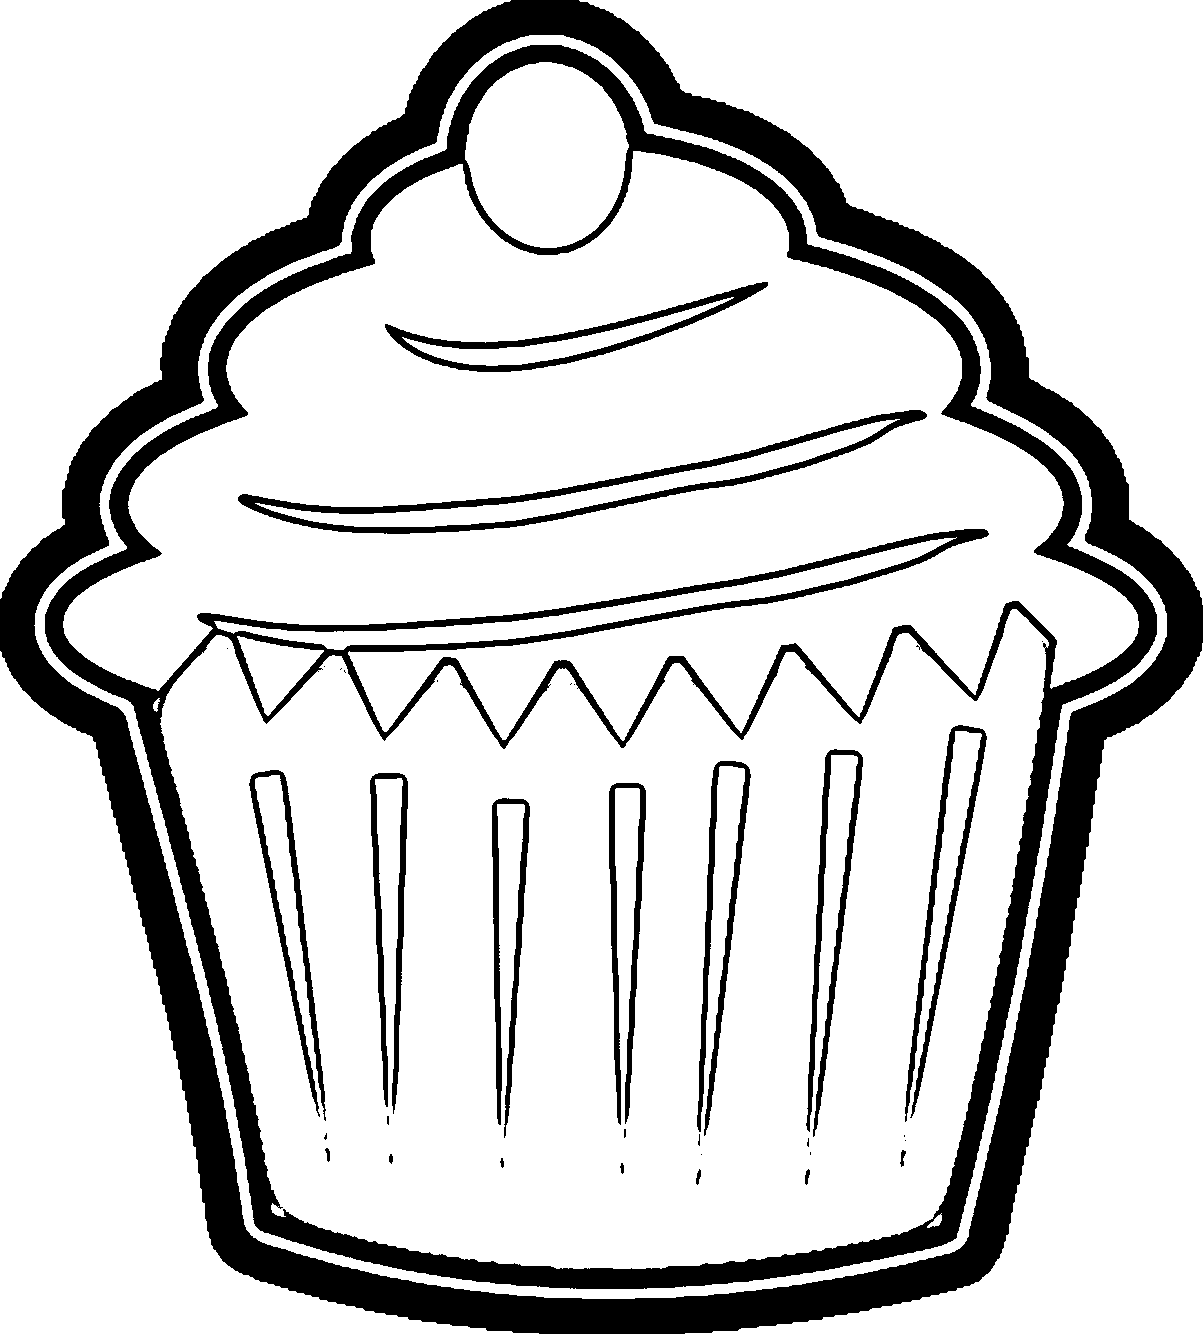 Cupcake Cup Cake Coloring Page 55 | Wecoloringpage